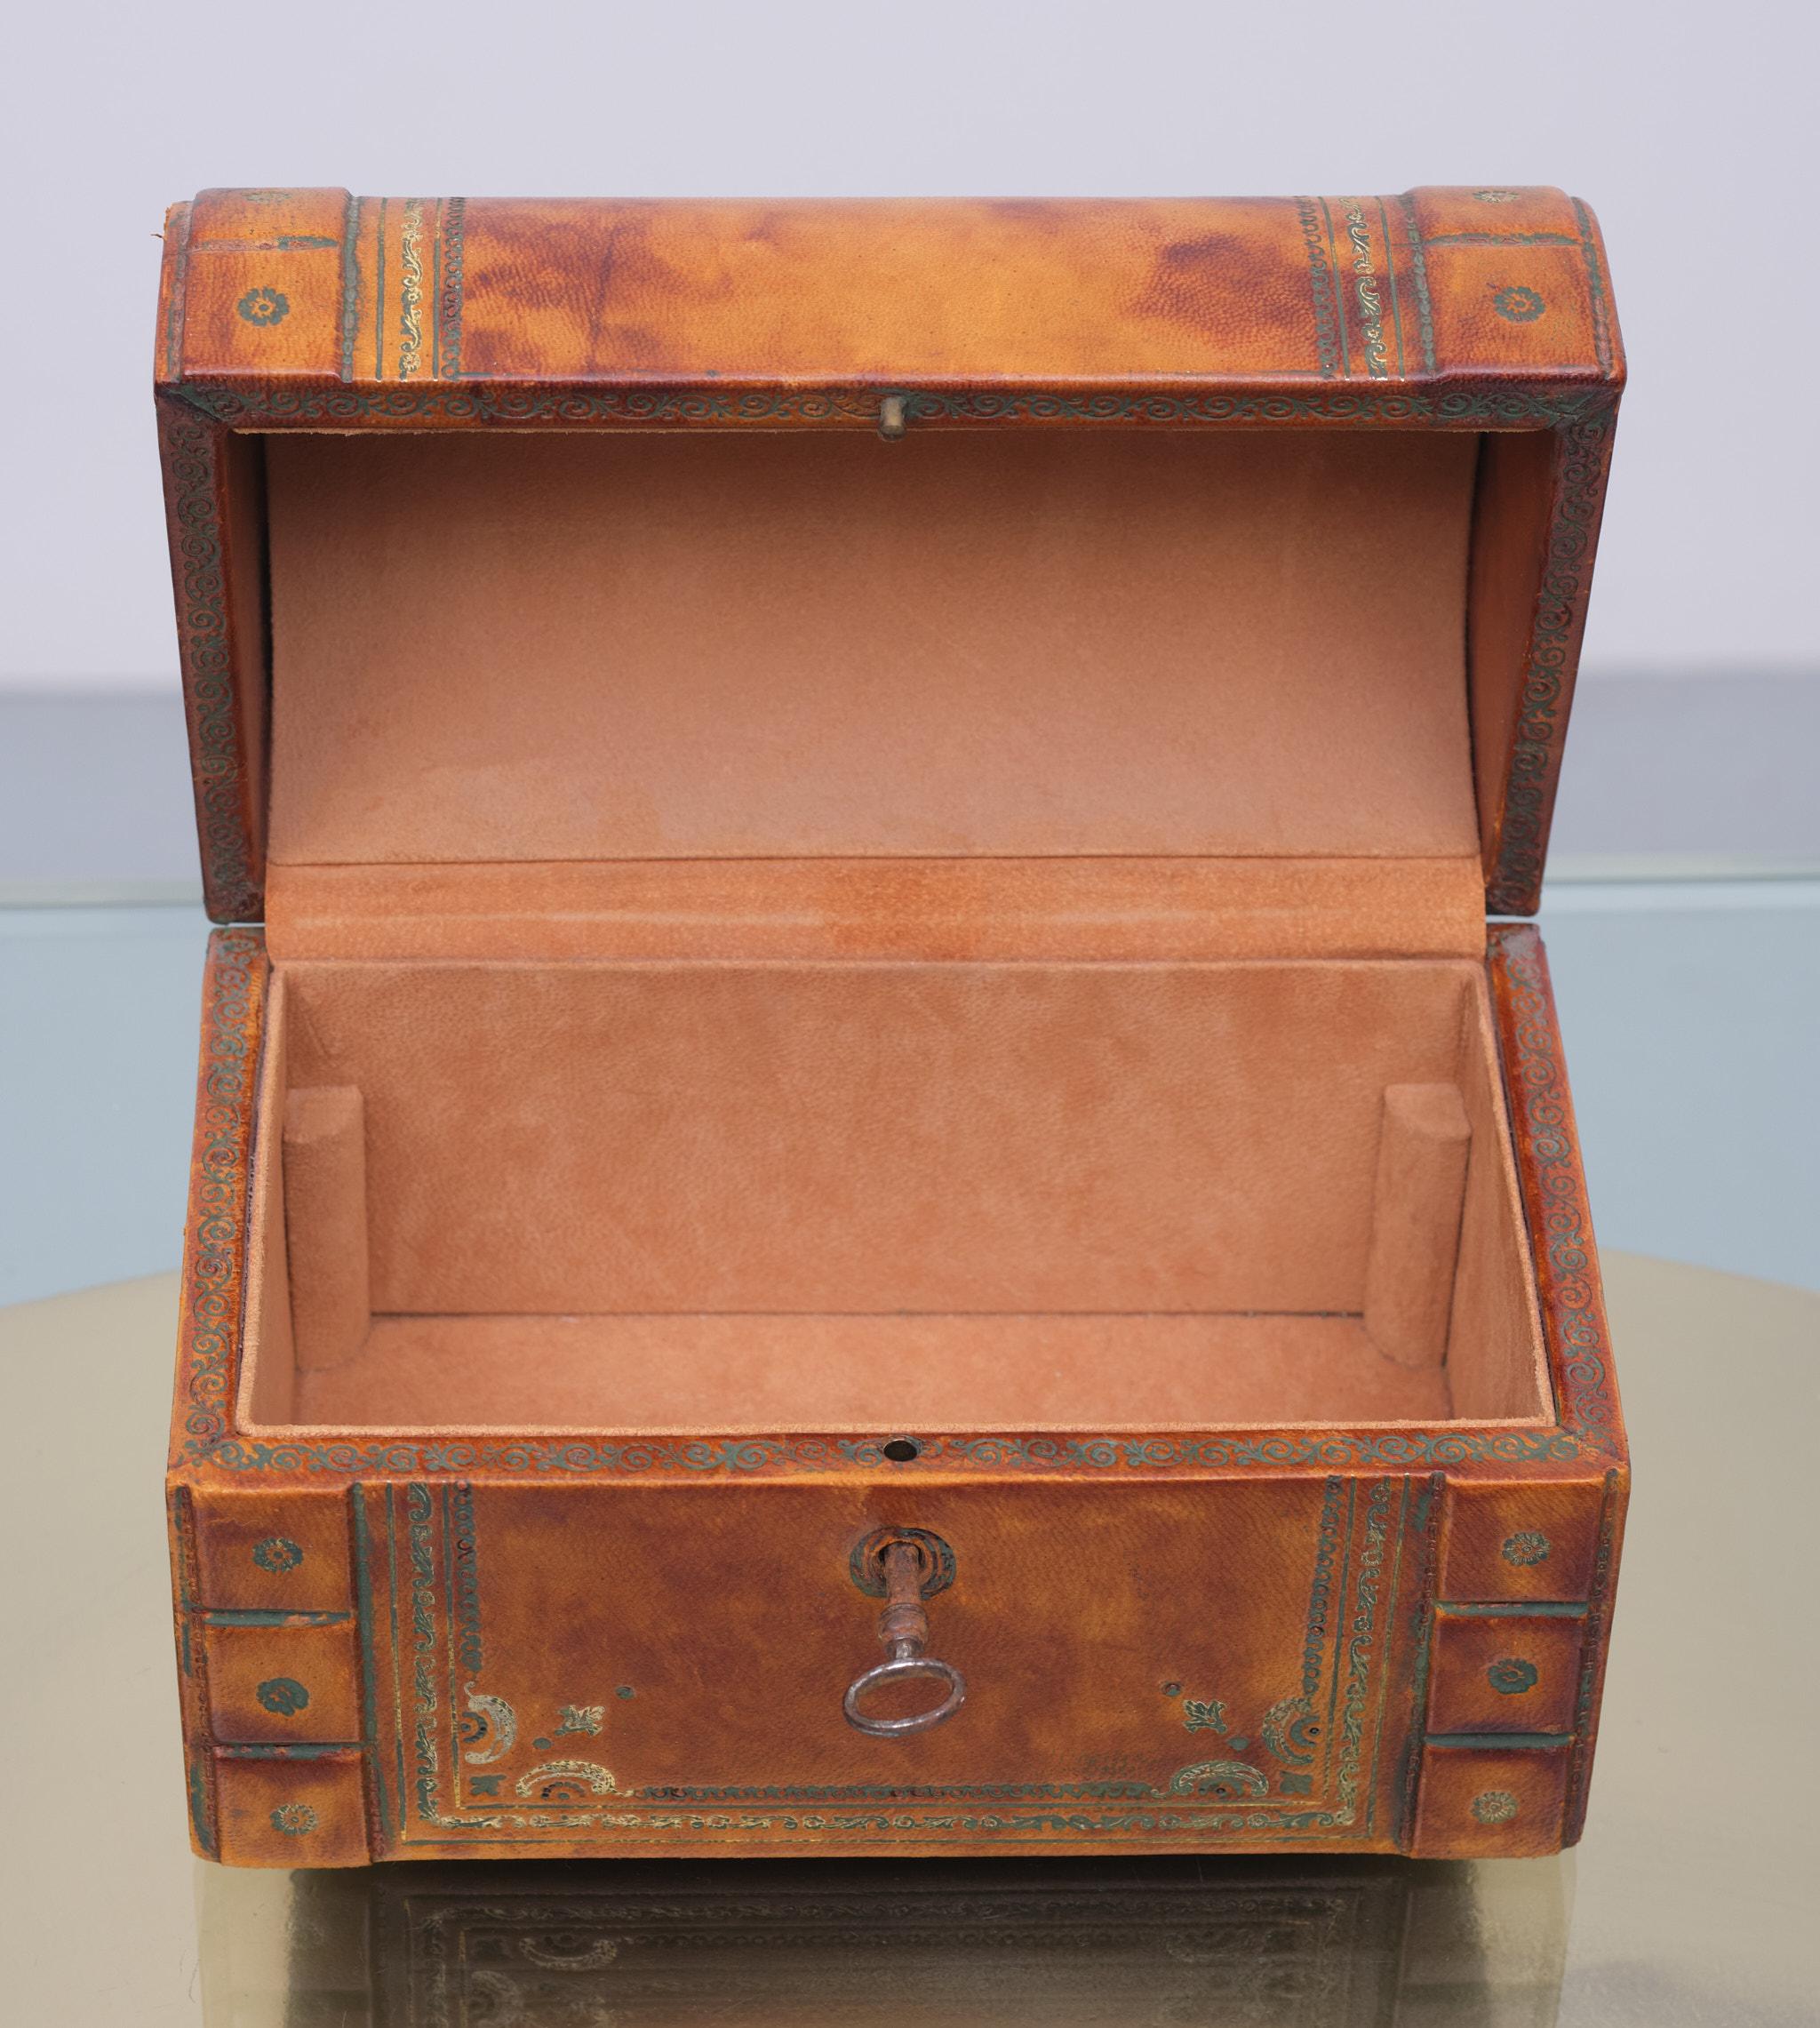 Very nice jewelry box. Gold embossed leather. Cognac color. 
Signed. Made in Italy. 1960s.